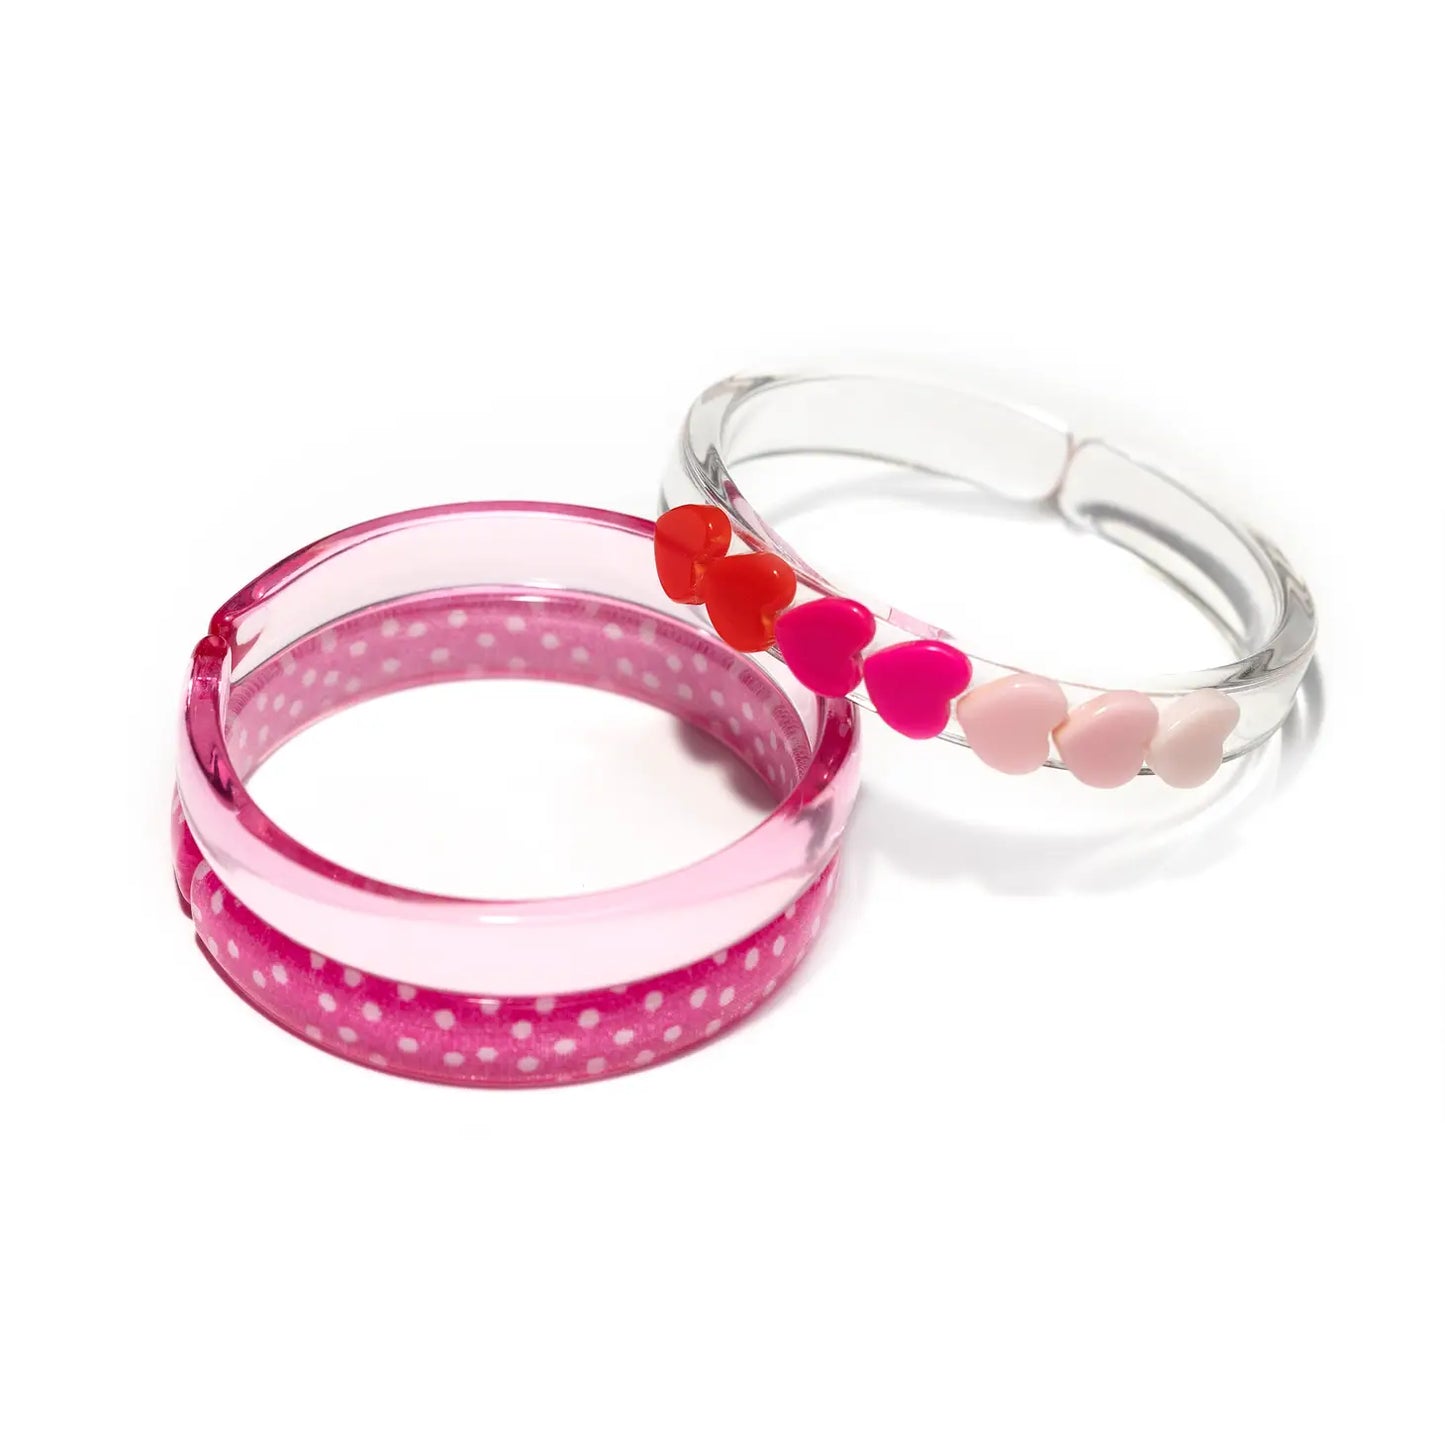 Lilies & Roses Centipede Heart Pink Shades Bangle Set of 3